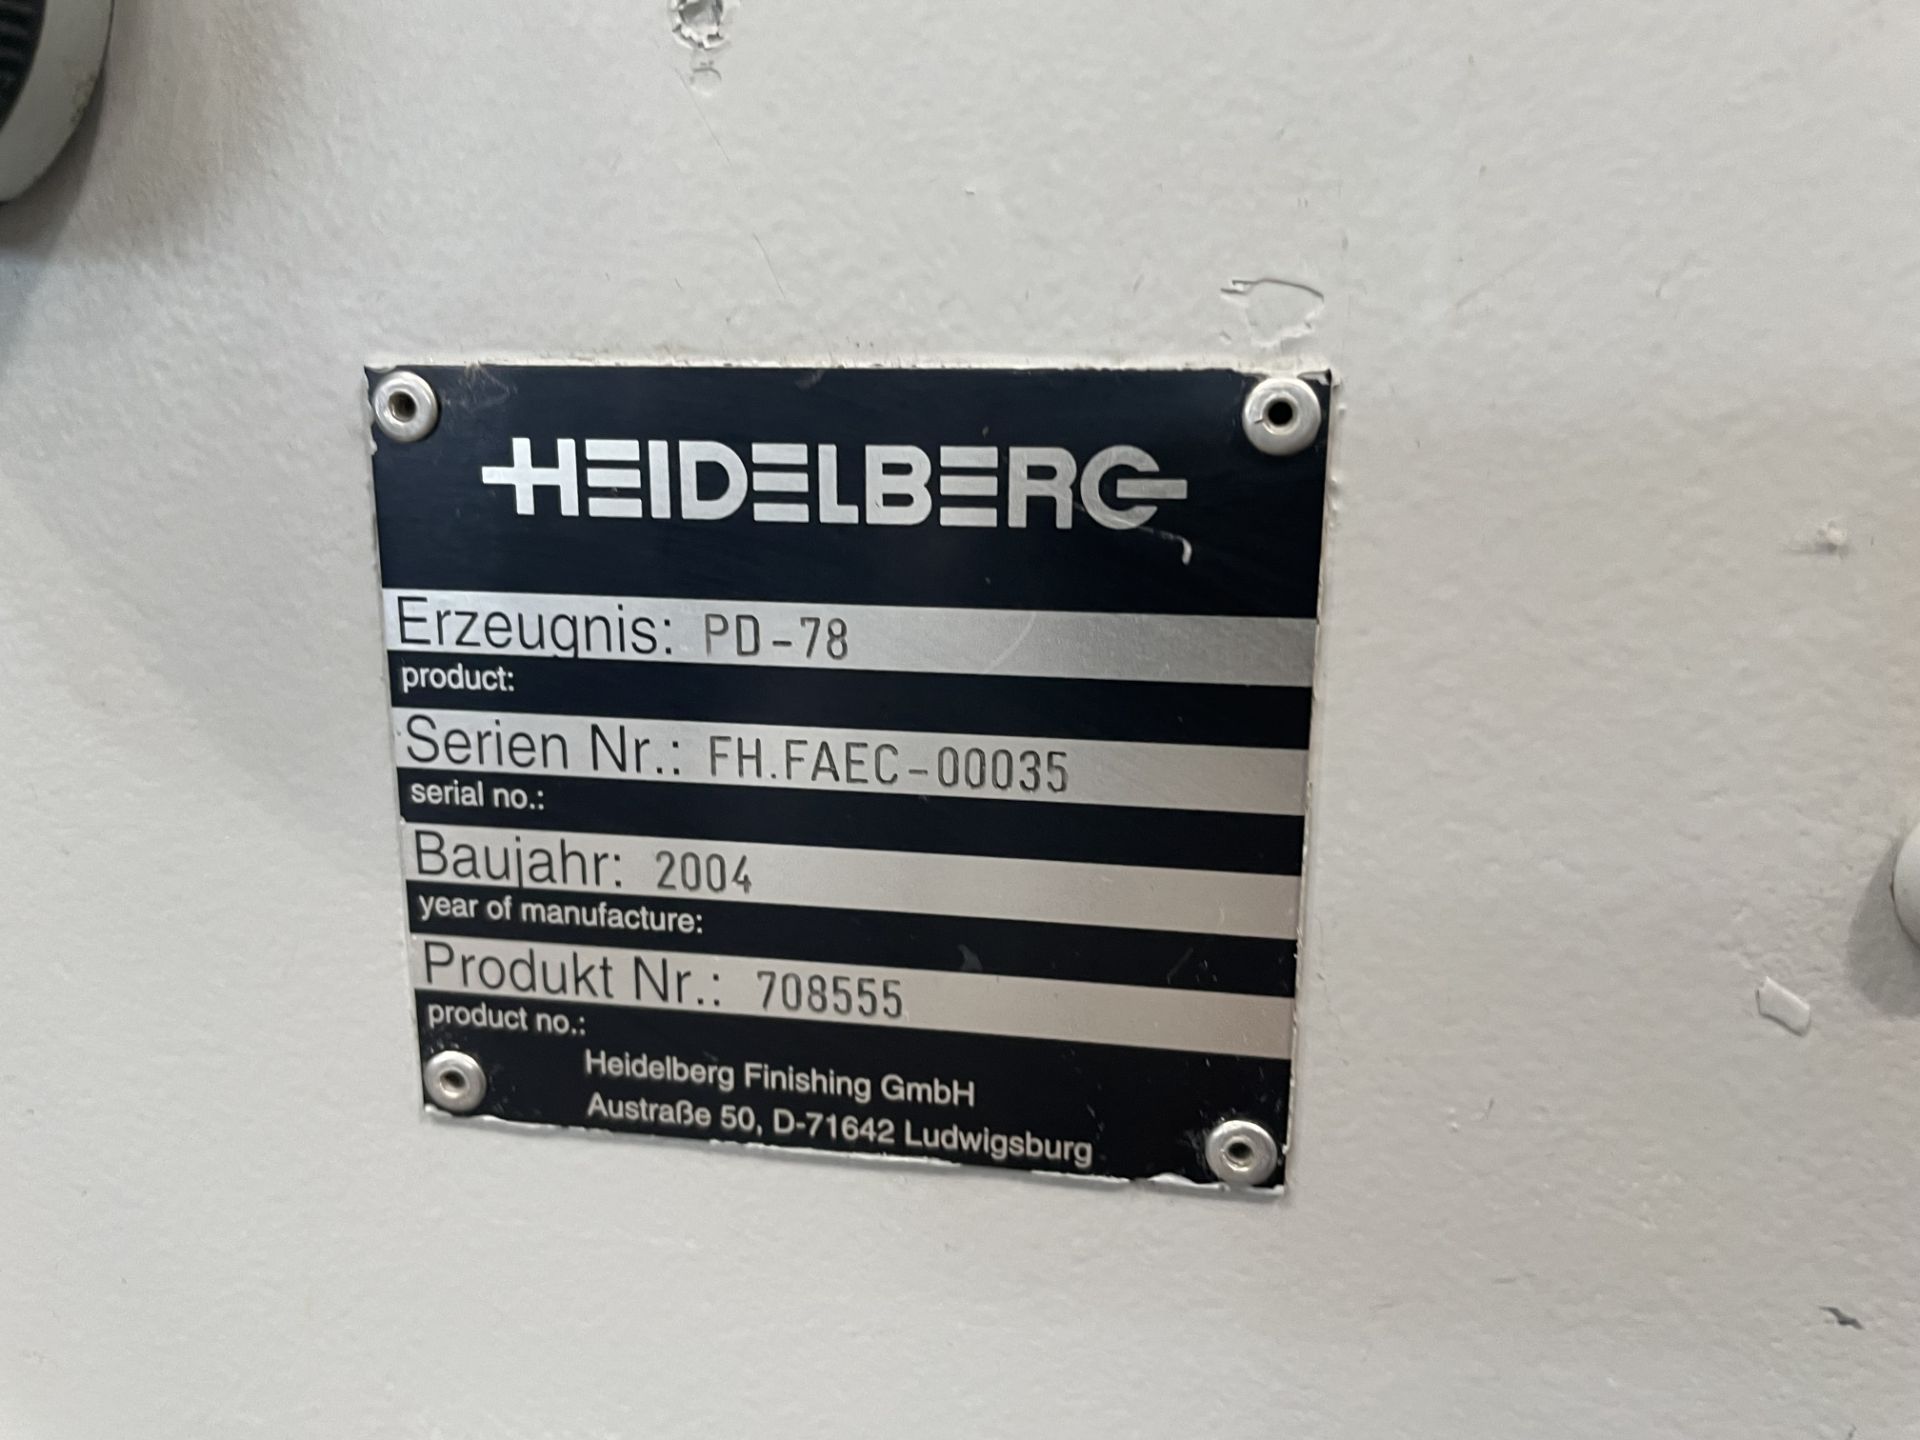 Heidelberg TD78-6-4-4-PD Stahl Folder, serial number FH.FAEC-00035, year of manufacture 2004, with - Image 5 of 16